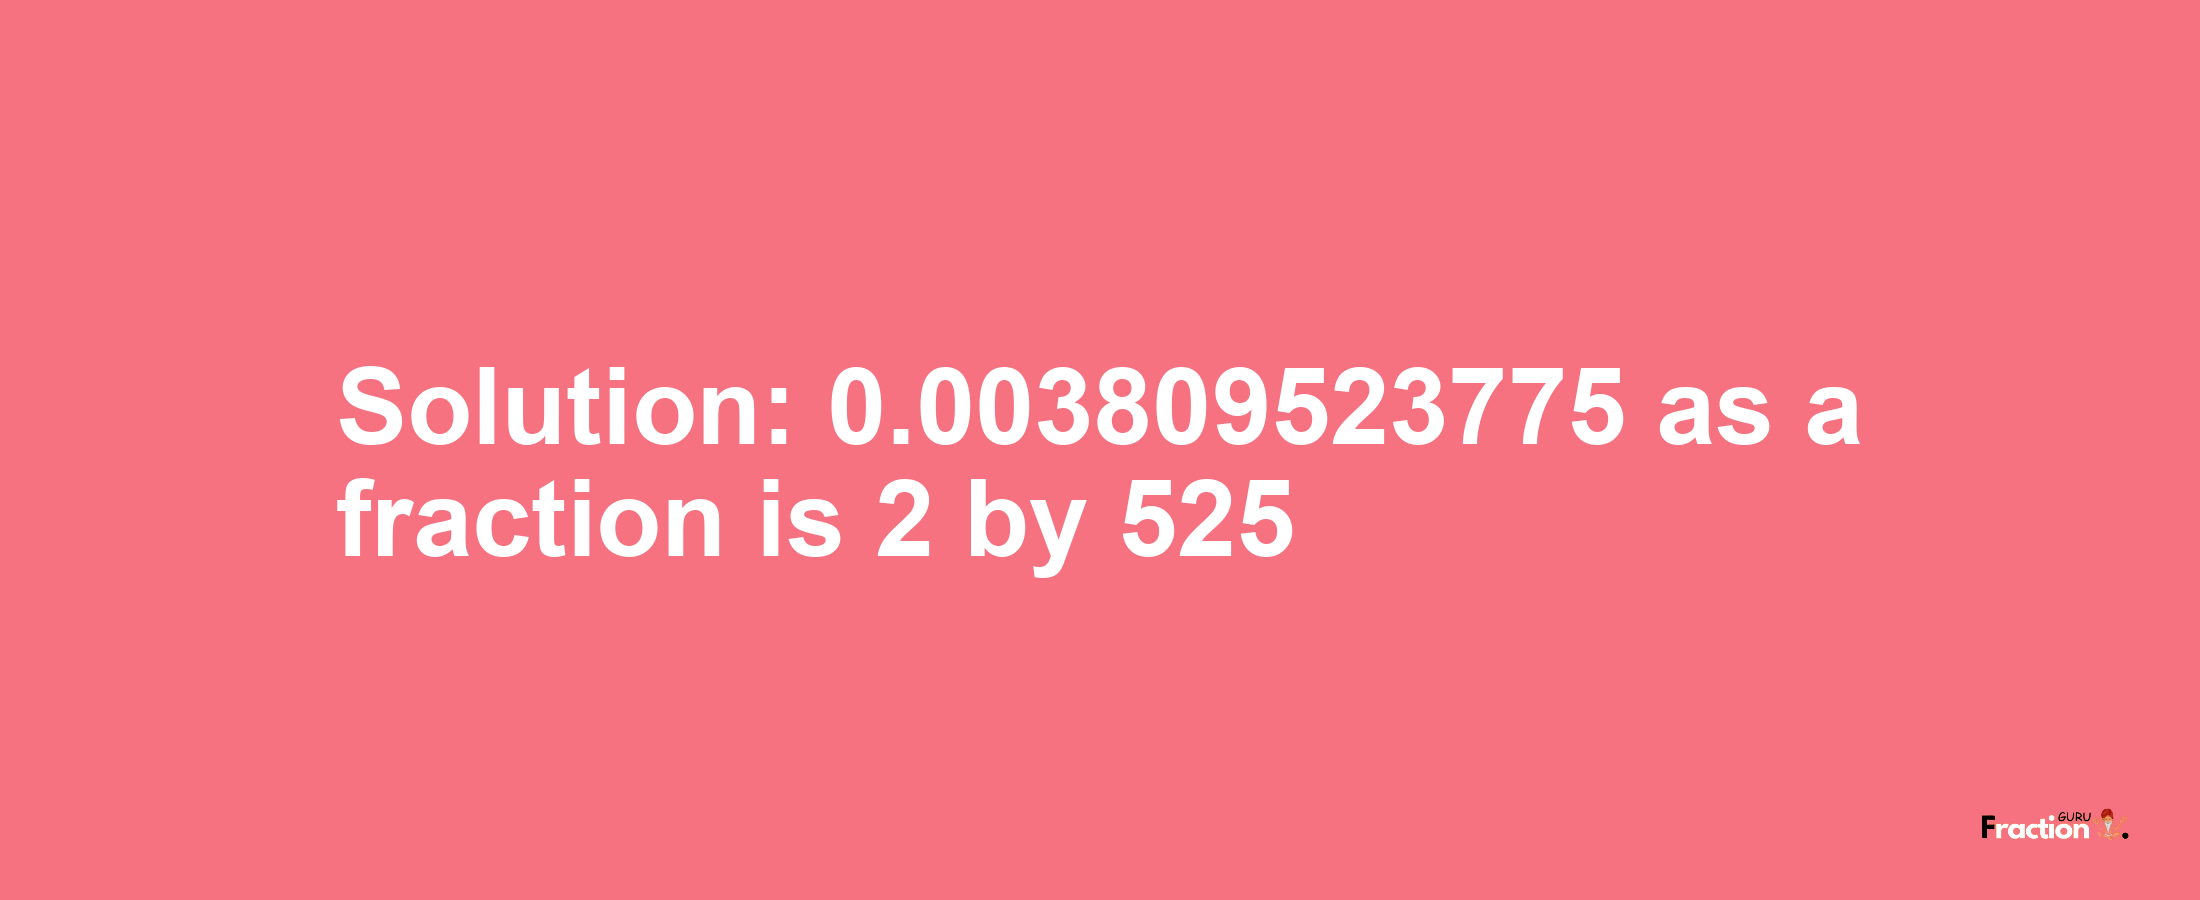 Solution:0.003809523775 as a fraction is 2/525